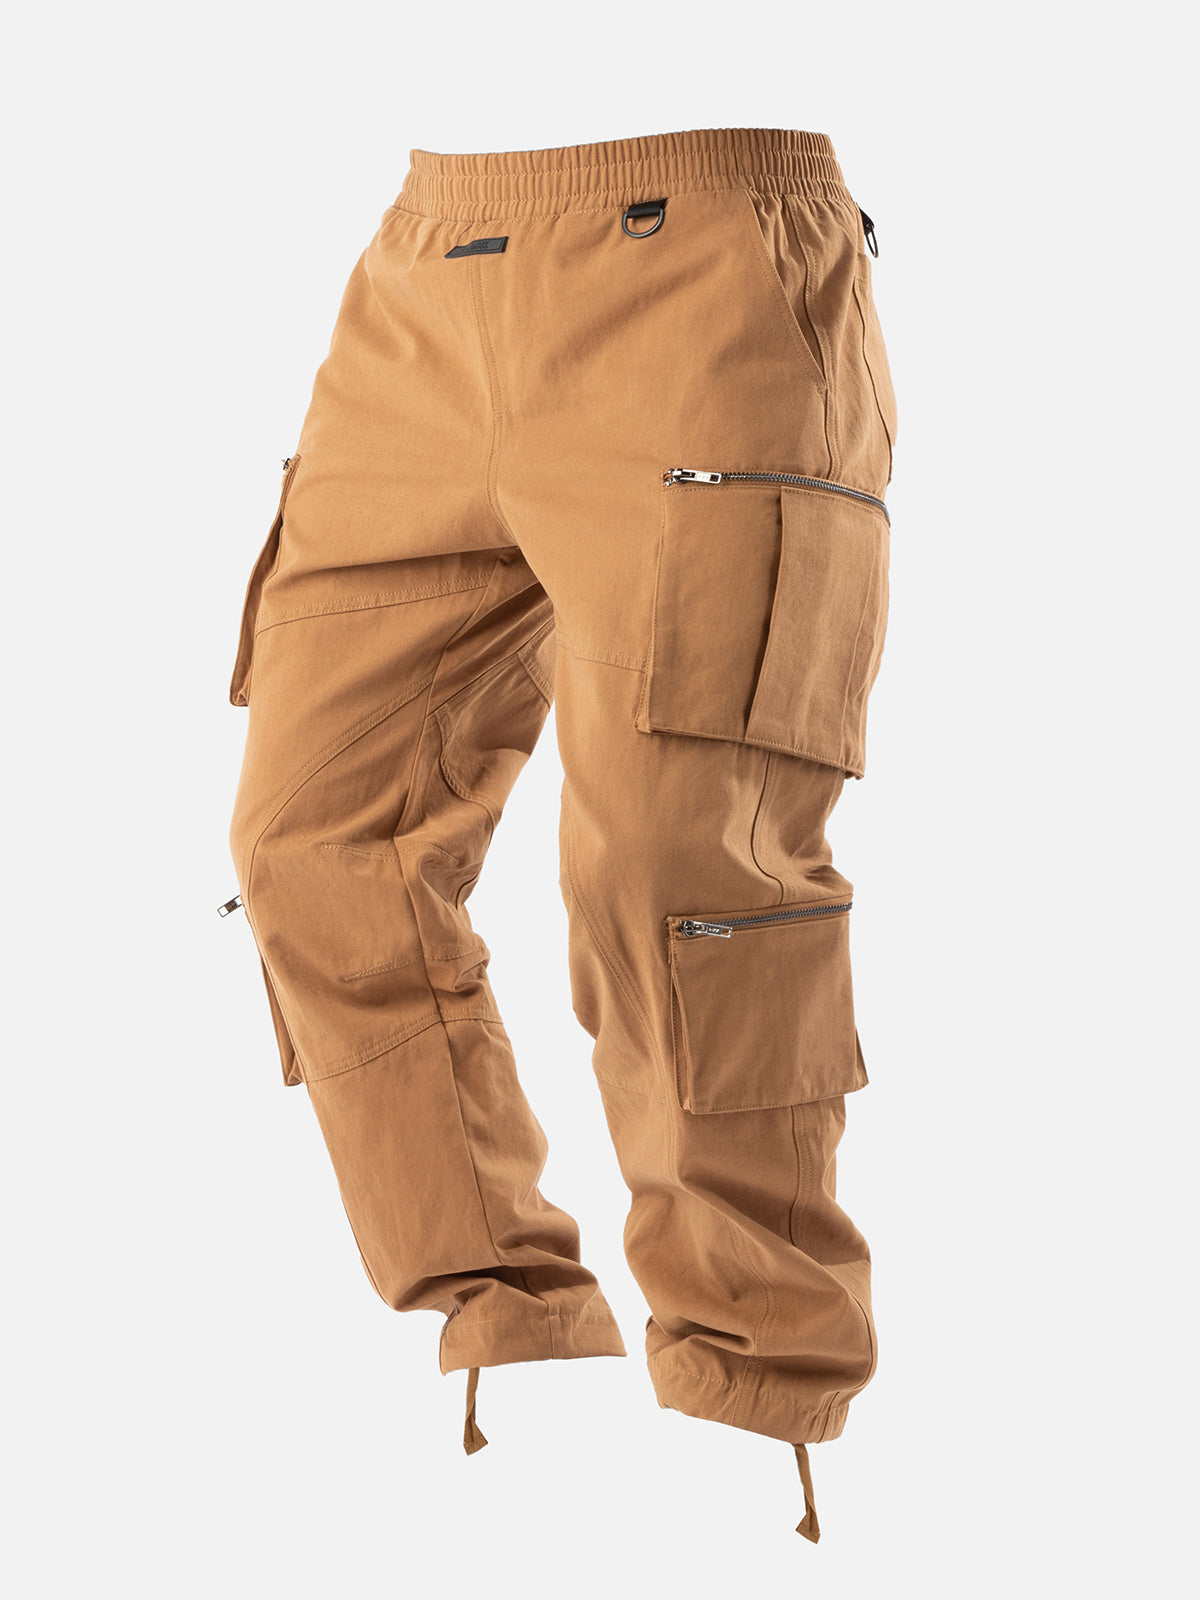 ALL IN A DAYS WORK HIGH RISE CARGO PANT in LIGHT BROWN